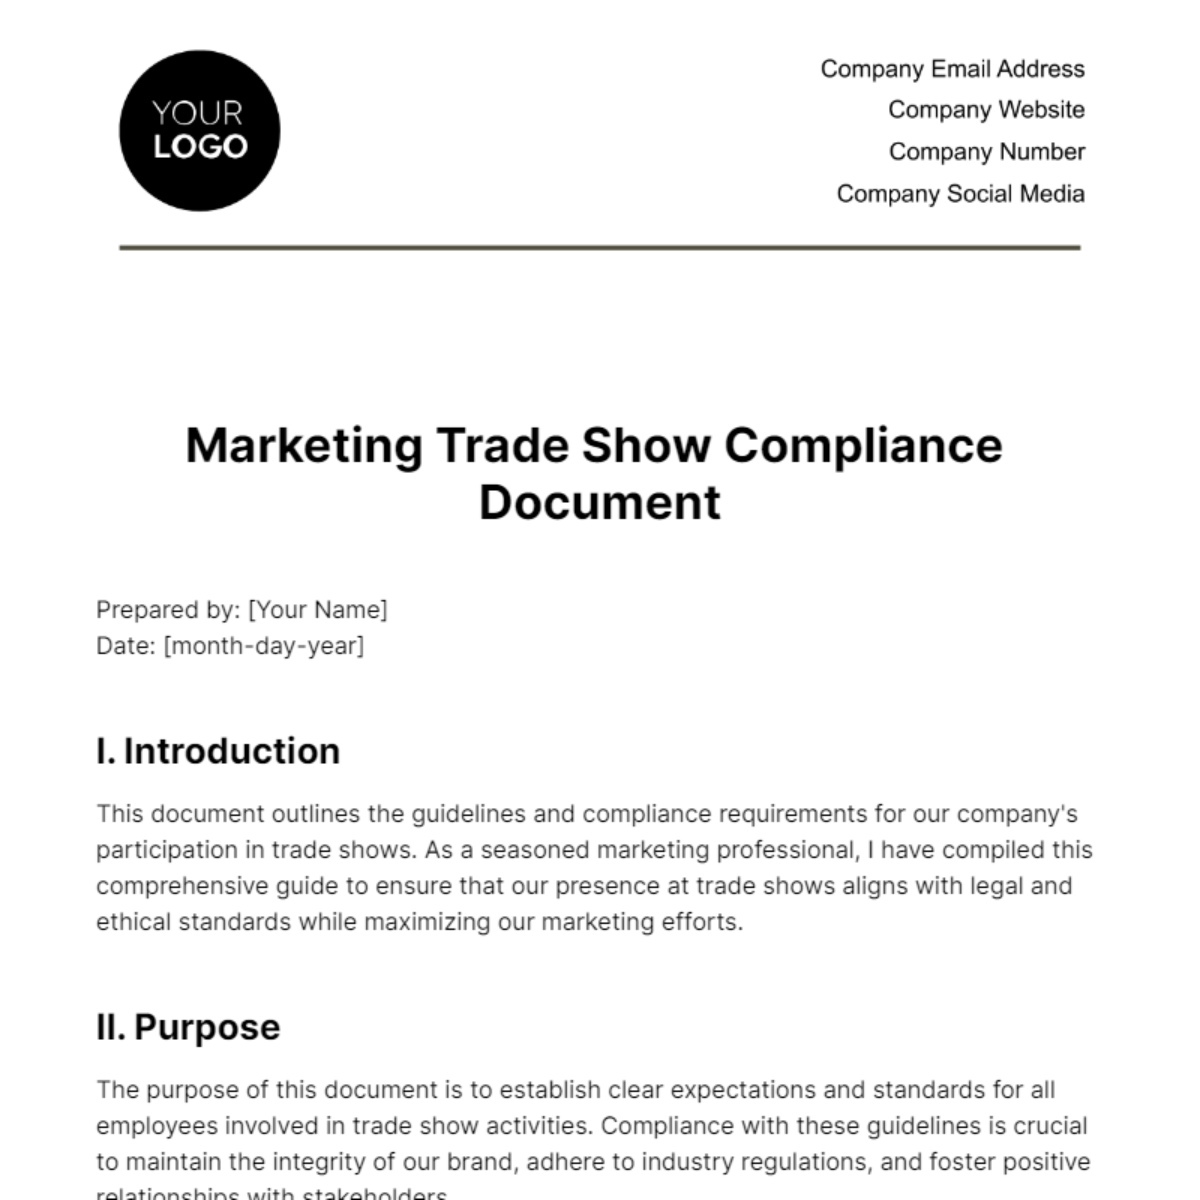 Marketing Trade Show Compliance Document Template